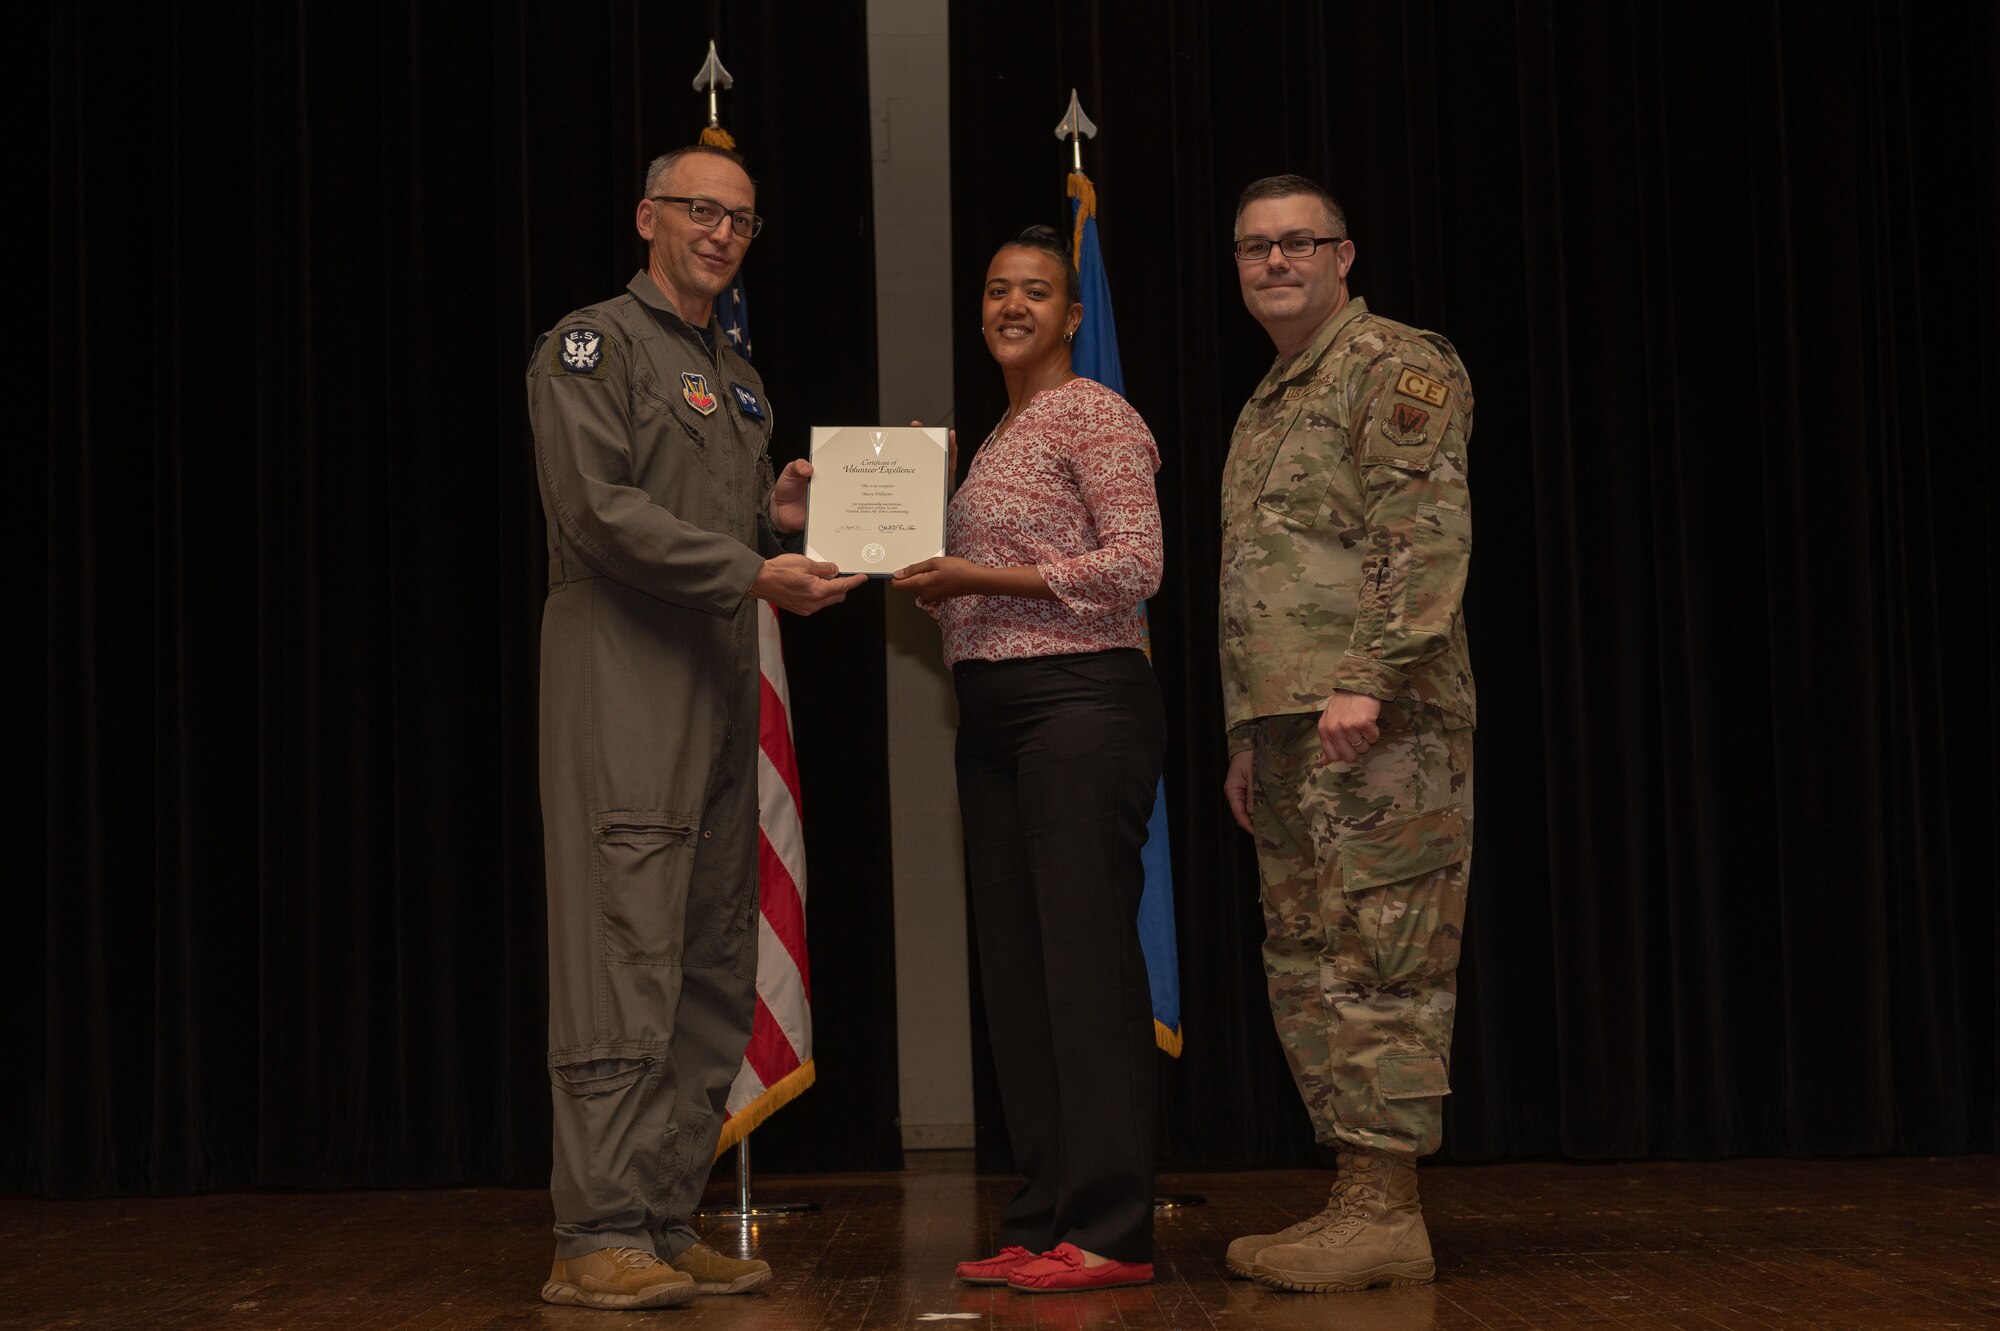 Col. Steven Bofferding, left, 4th Fighter Wing vice commander, and Chief Master Sgt. Kyle O’Hara, right, 4th Civil Engineer Squadron command chief, present the Volunteer Excellence Award to Mary Williams, center, during a volunteer appreciation ceremony at Seymour Johnson Air Force Base, North Carolina, April 21, 2023. This award recognizes sustained, direct and impactful service. (U.S. Air Force photo by Airman 1st Class Rebecca Sirimarco-Lang)